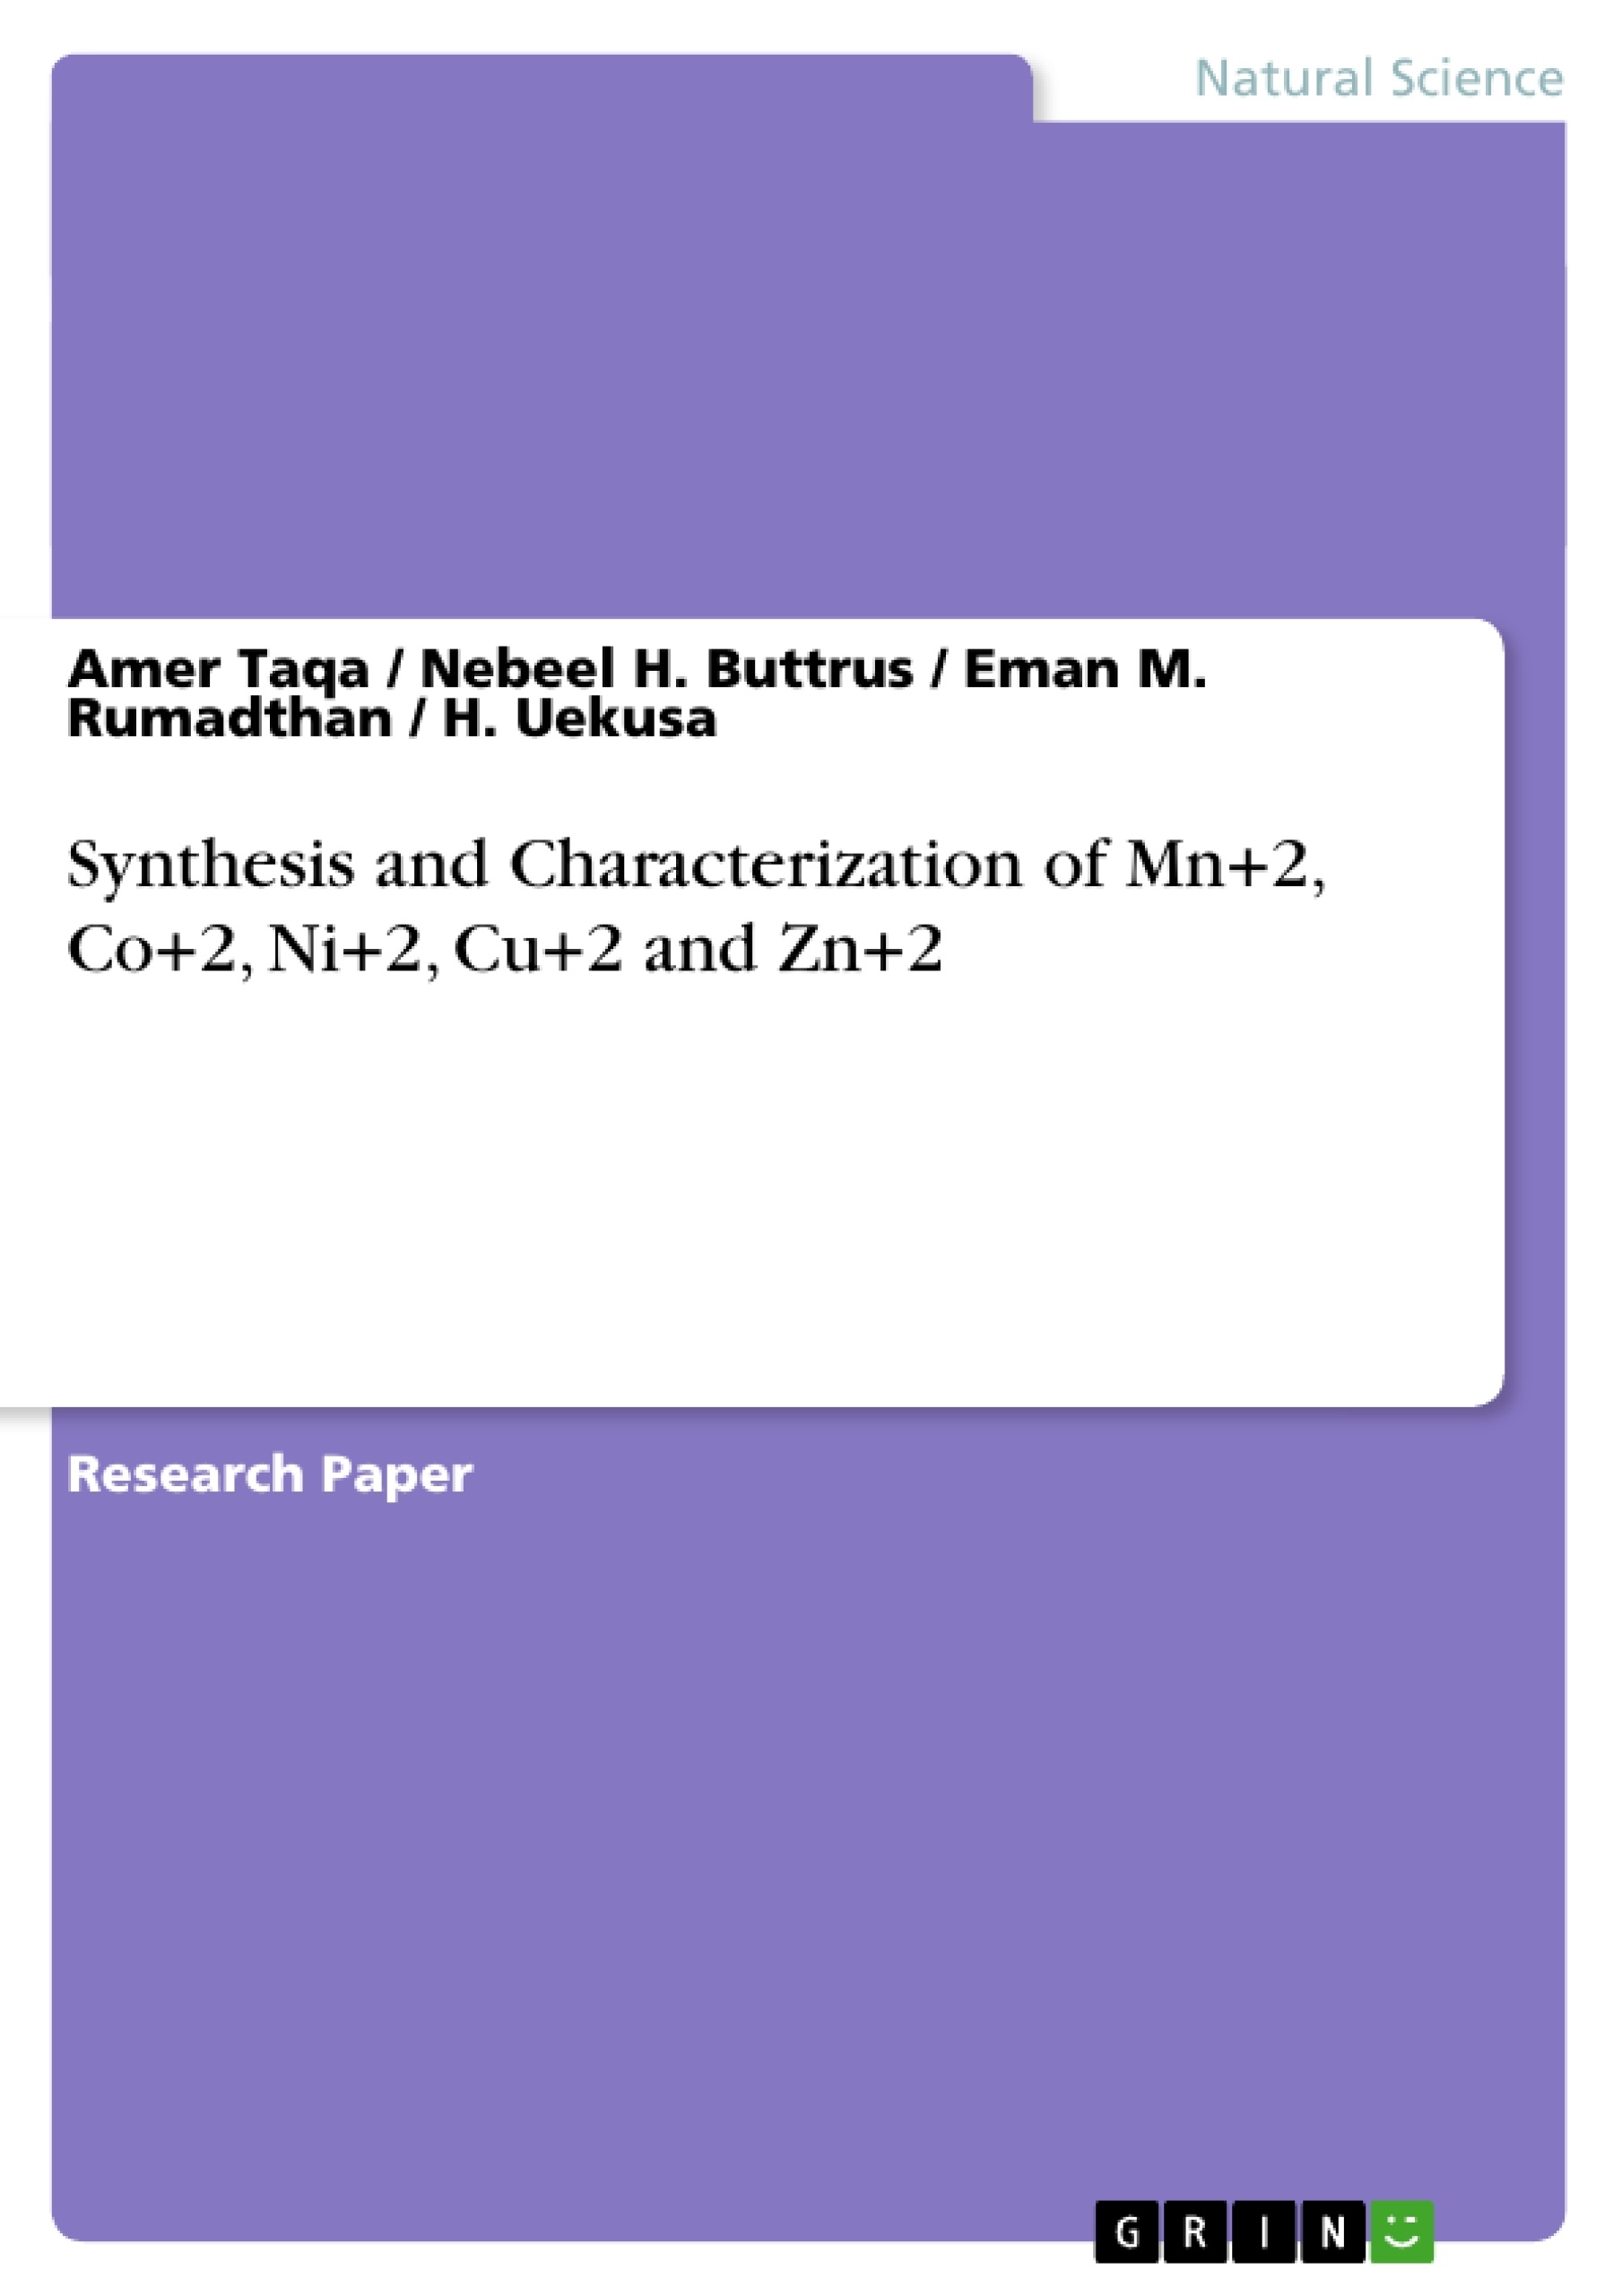 Title: Synthesis and Characterization of Mn+2, Co+2, Ni+2, Cu+2 and Zn+2